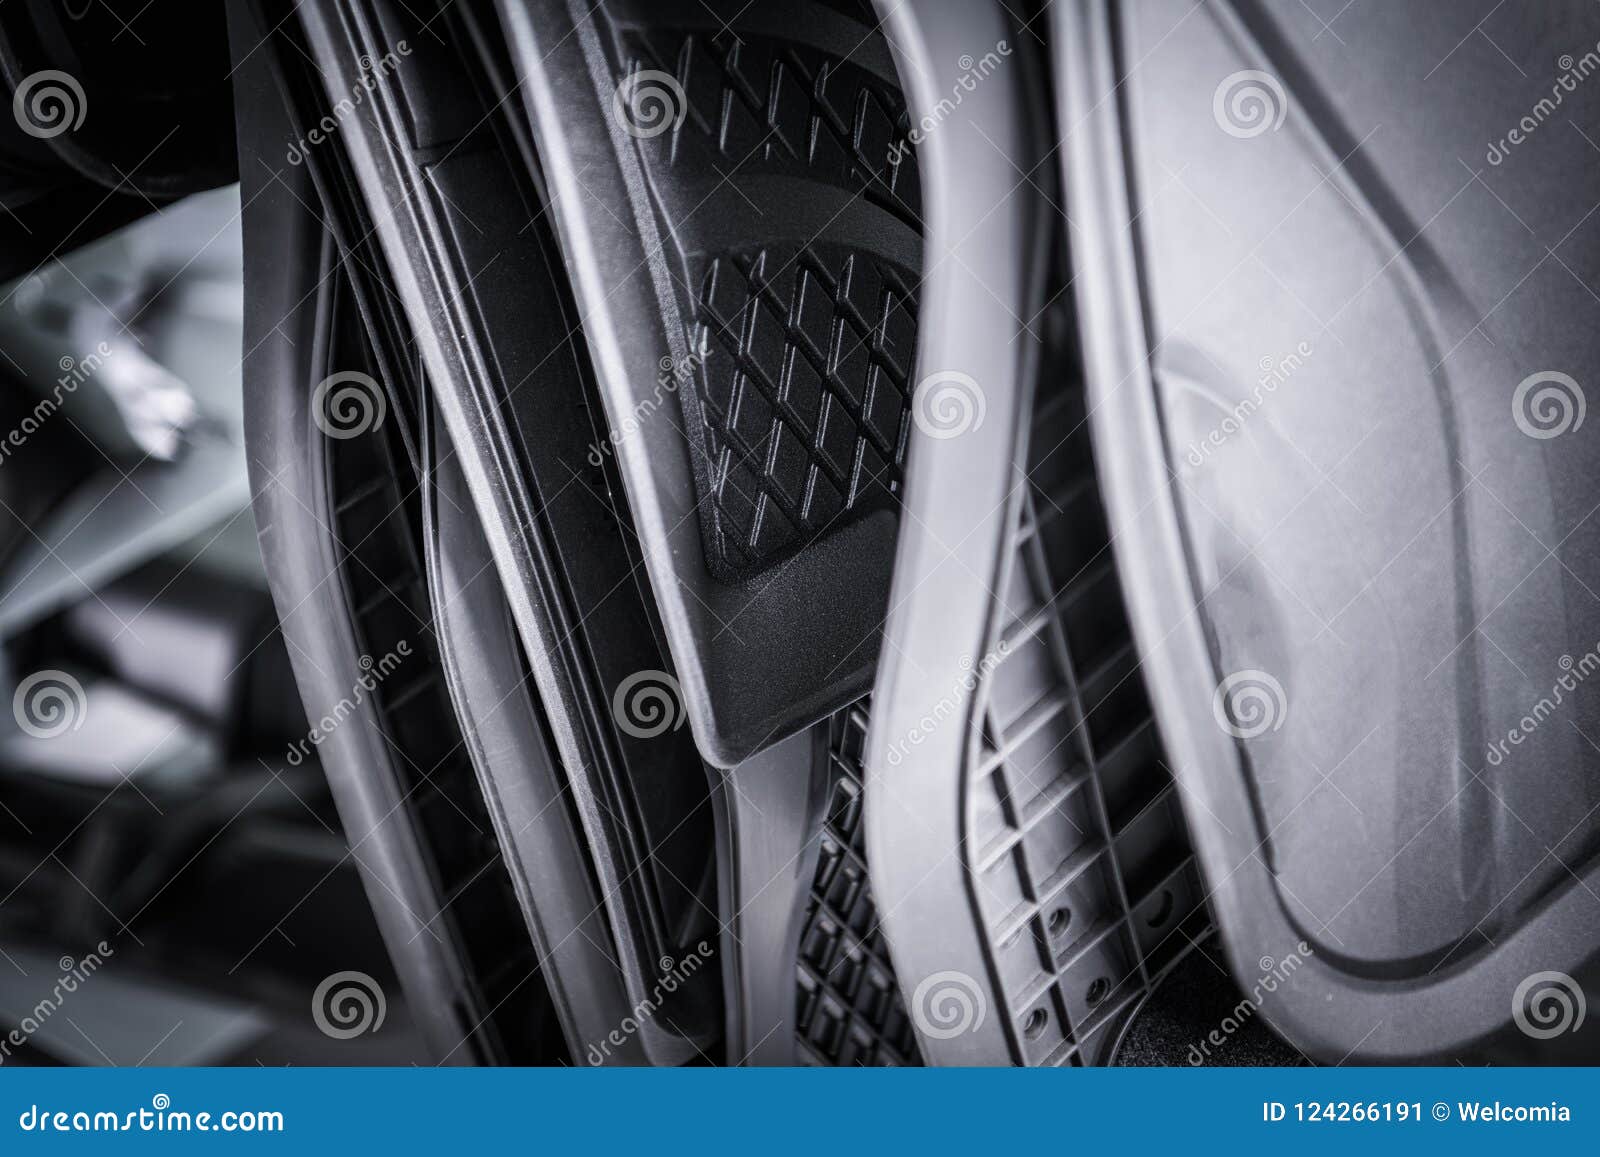 Vehicle Floor Mats Stock Image Image Of Clean Cleaning 124266191